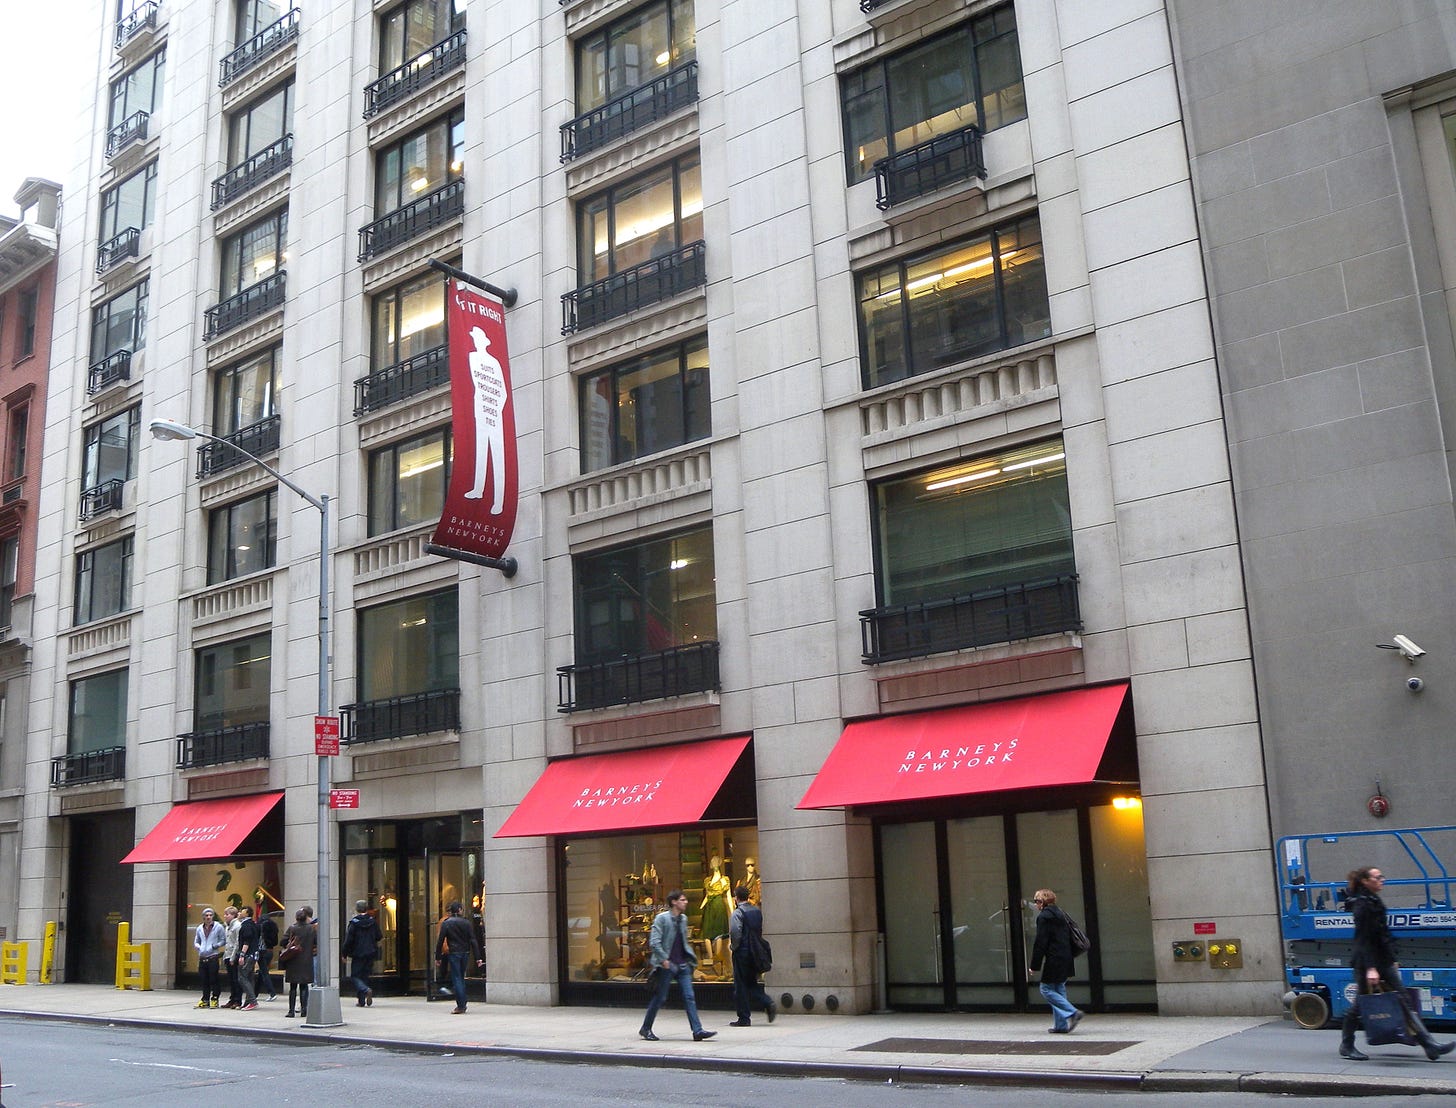 A view of the Barneys New York flagship exterior with bright red awnings over the first floor windows that read, "Barneys New York". Everyday New Yorkers walk past the building facade glancing into its display windows.